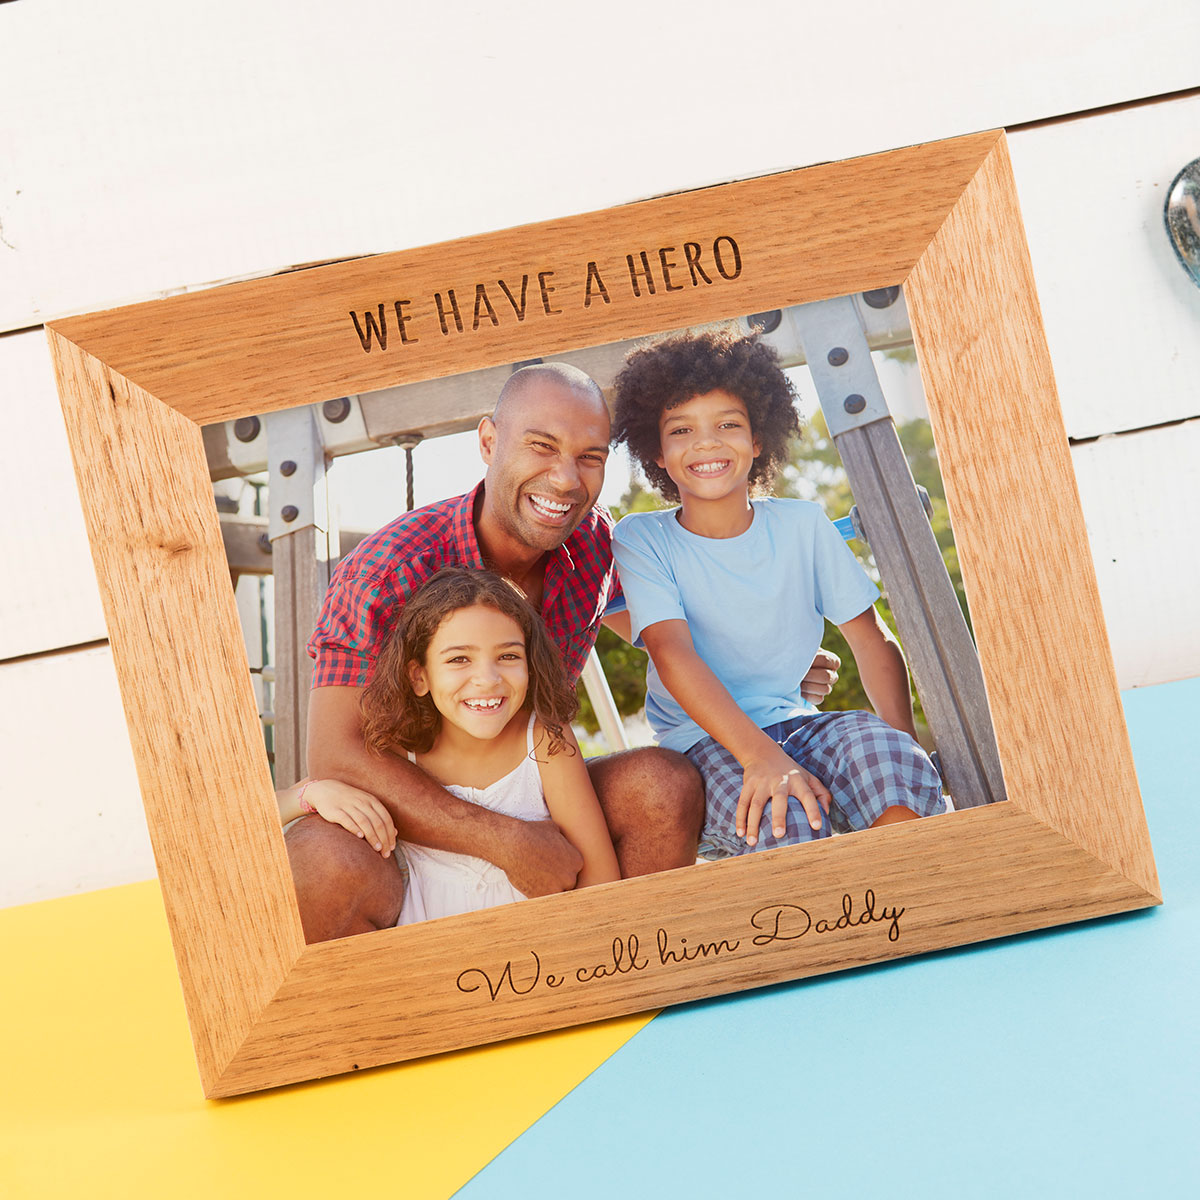 Personalised Wooden Photo Frame - A Hero